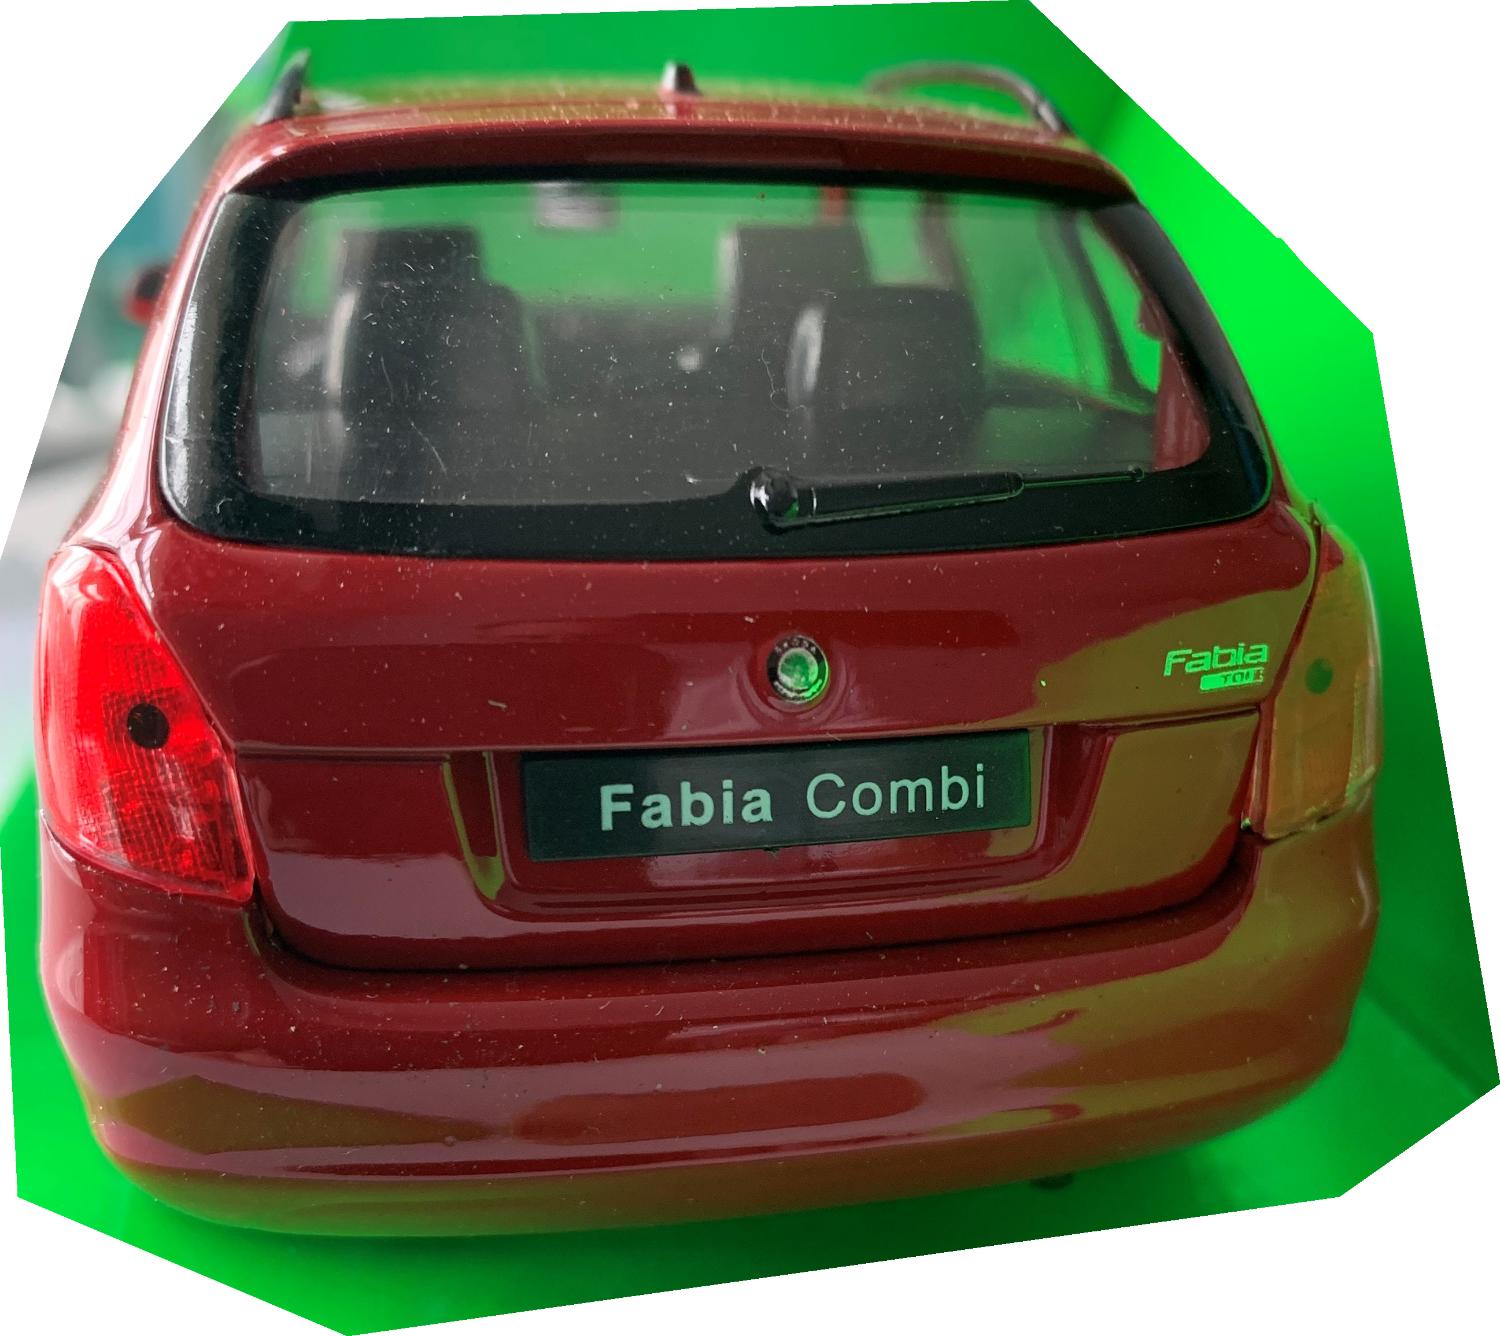 An excellent reproduction of the Skoda Fabia Combi II with high level of detail throughout, all authentically recreated. The model is presented in a window display box,